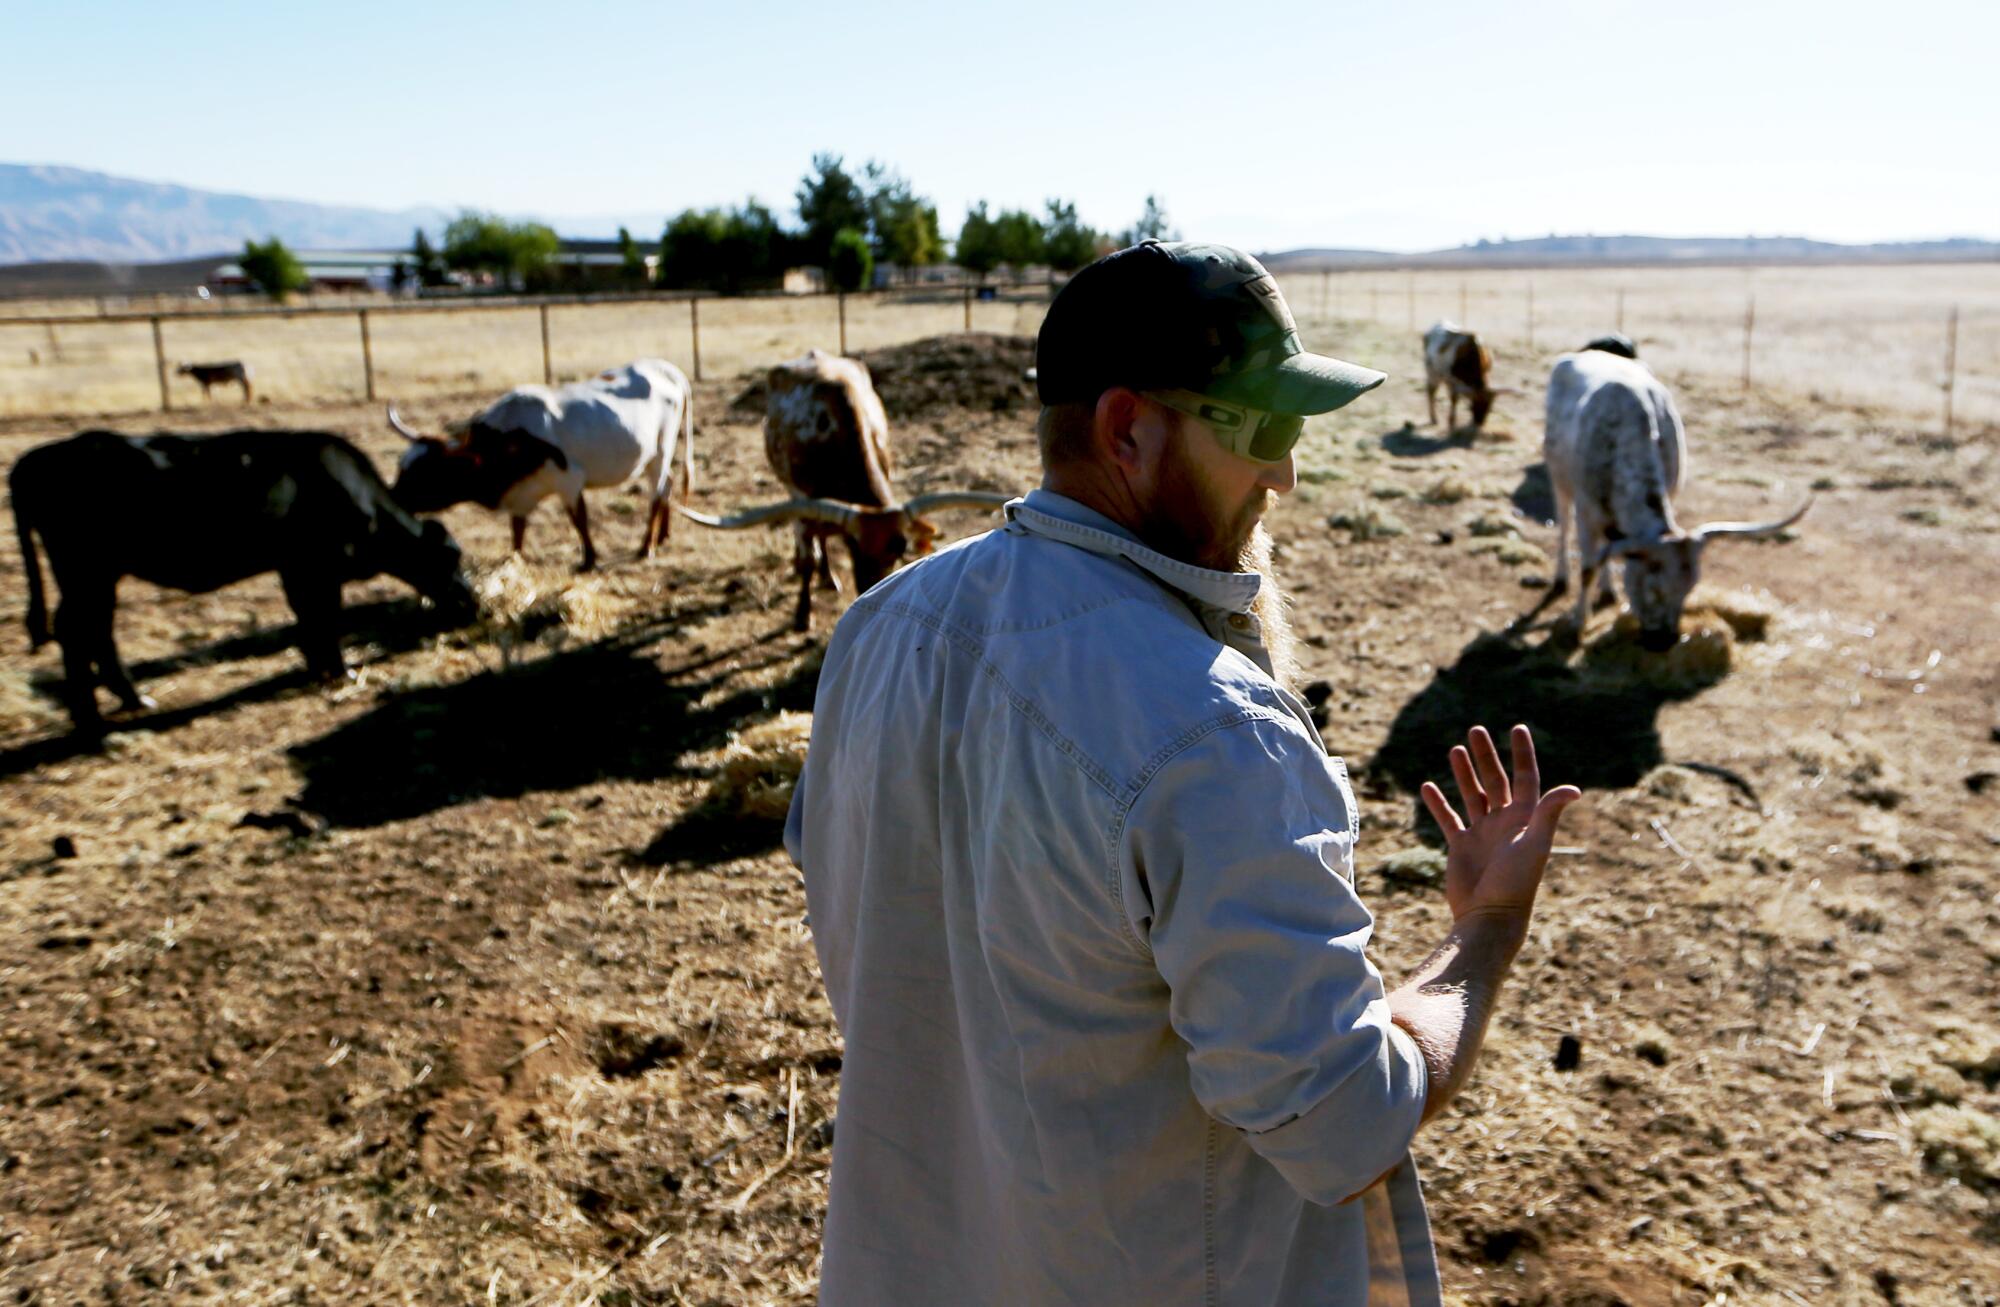 Charlie Bosma feeds cattle at his ranch in the Cuyama Valley.